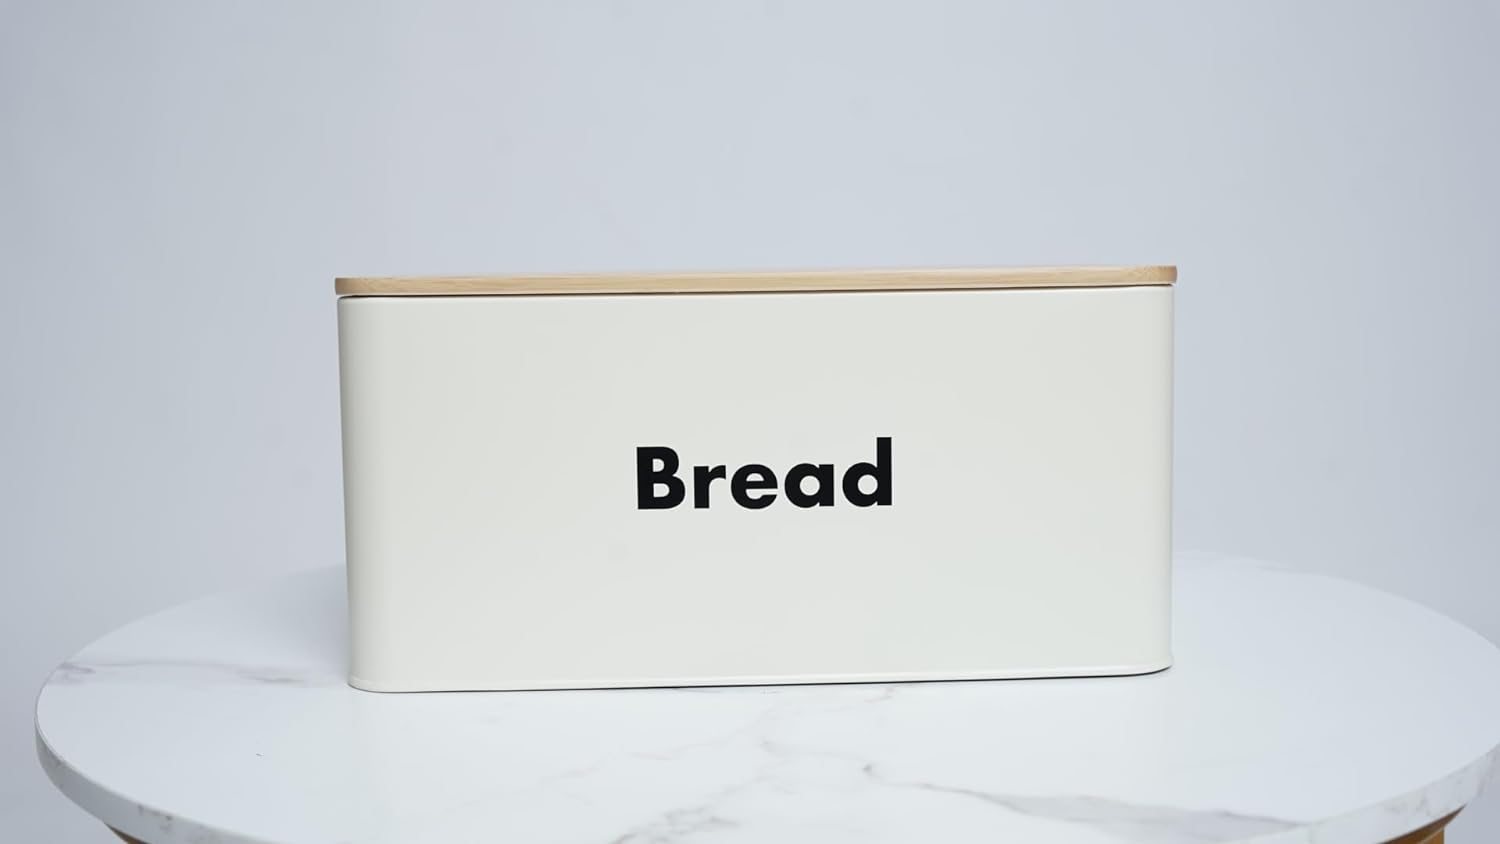 4-piece Beige Metal Bread Box Set with Bamboo Cutting Board Lid - 3